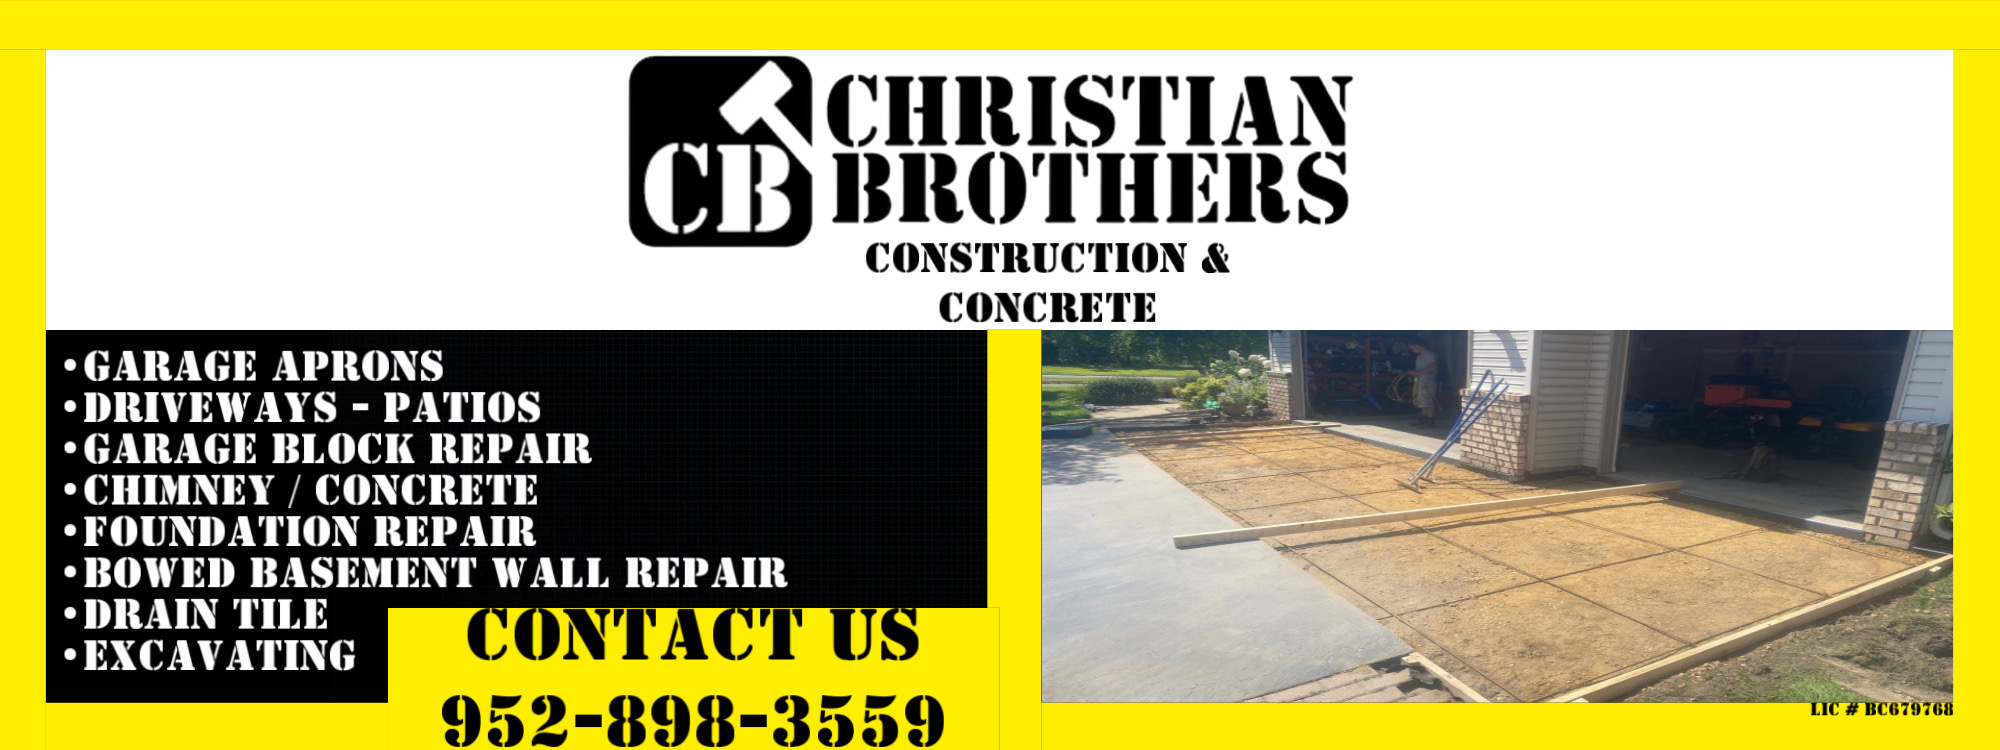 Christian Brothers Construction and Concrete